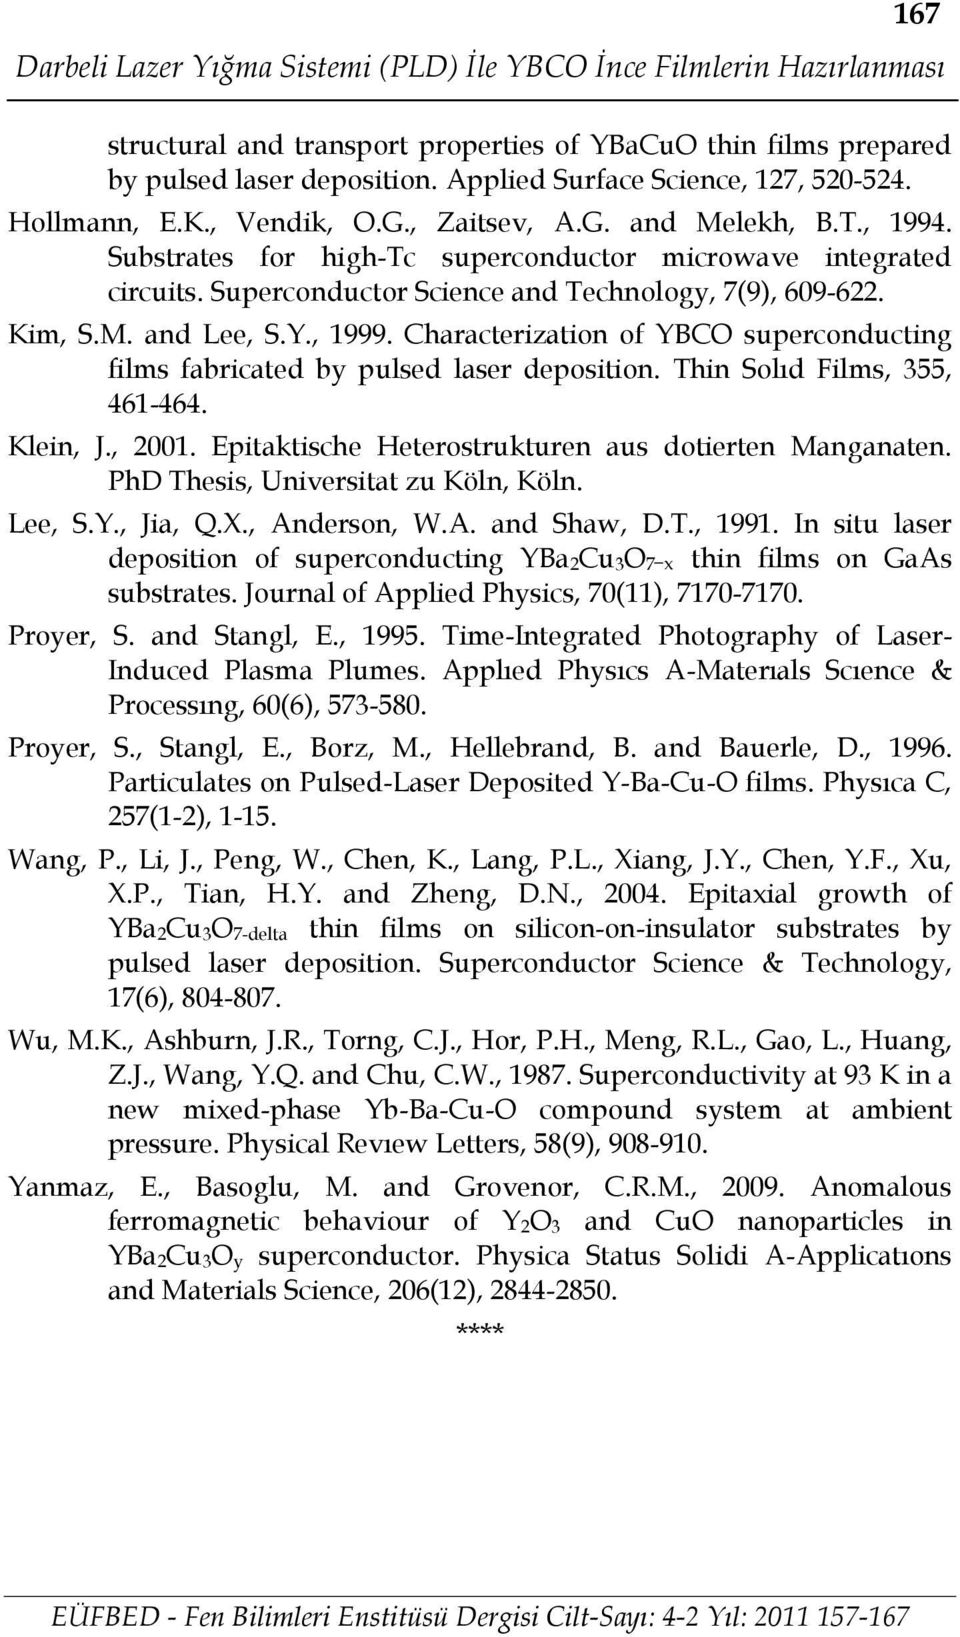 Superconductor Science and Technology, 7(9), 609-622. Kim, S.M. and Lee, S.Y., 1999. Characterization of YBCO superconducting films fabricated by pulsed laser deposition.